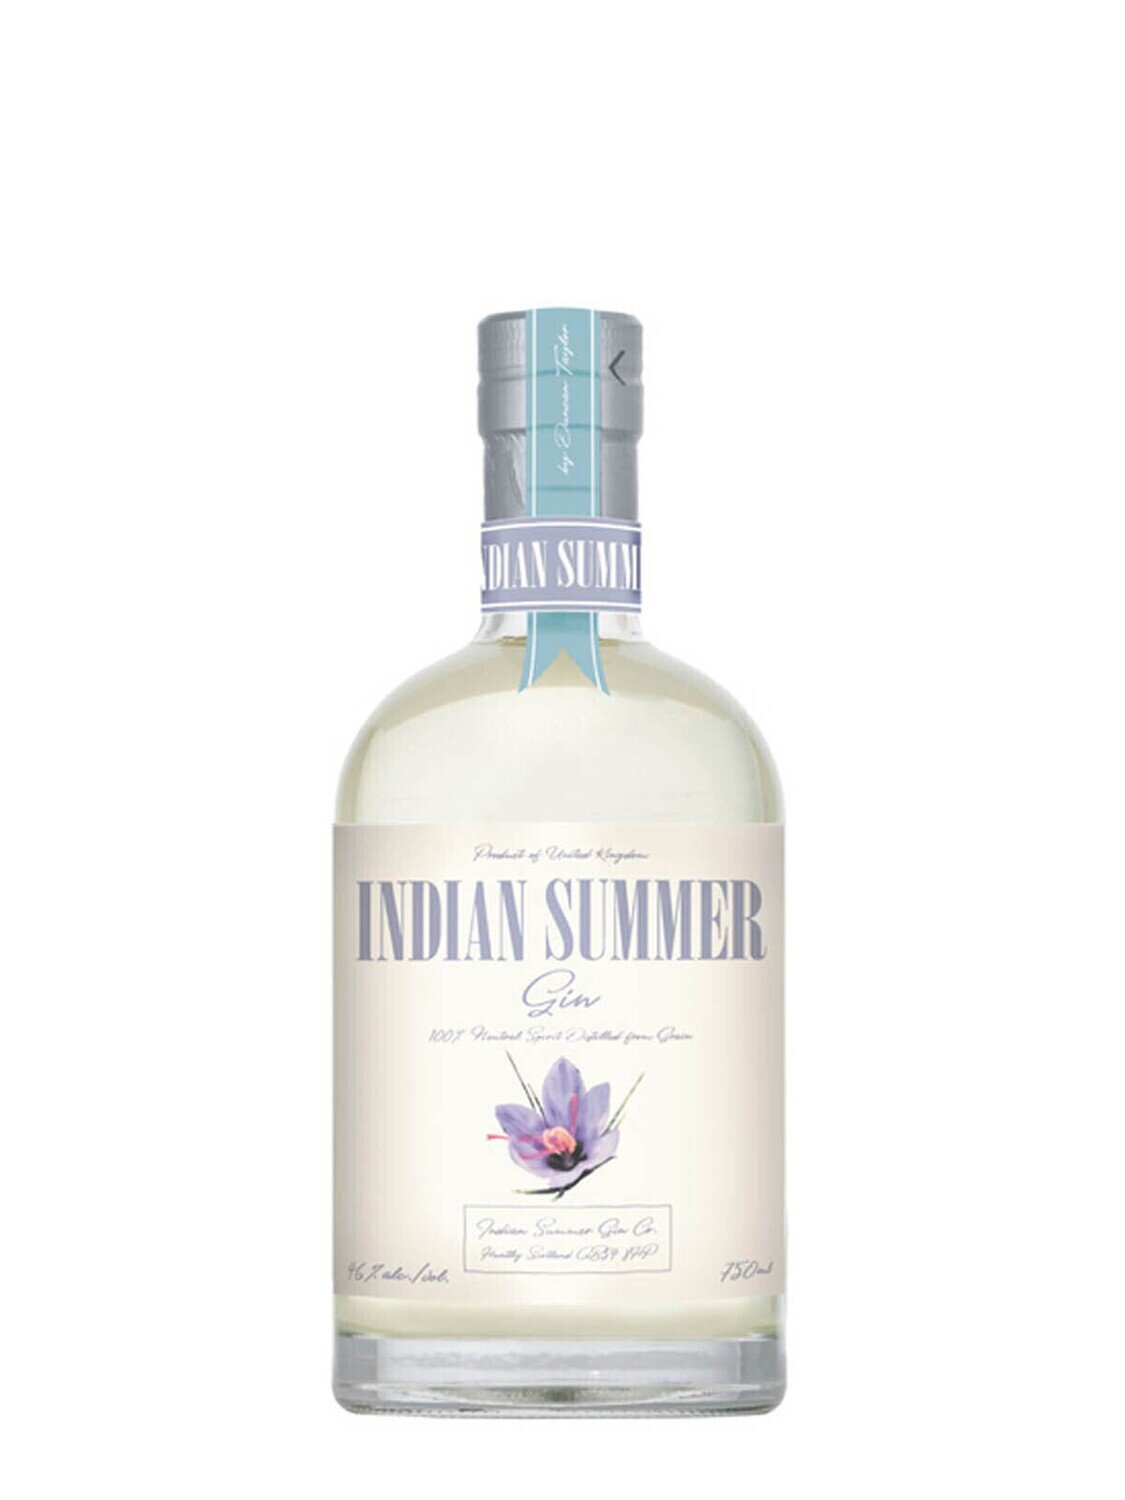 Indian Summer Saffron Infused Gin 46% ABV 750mL